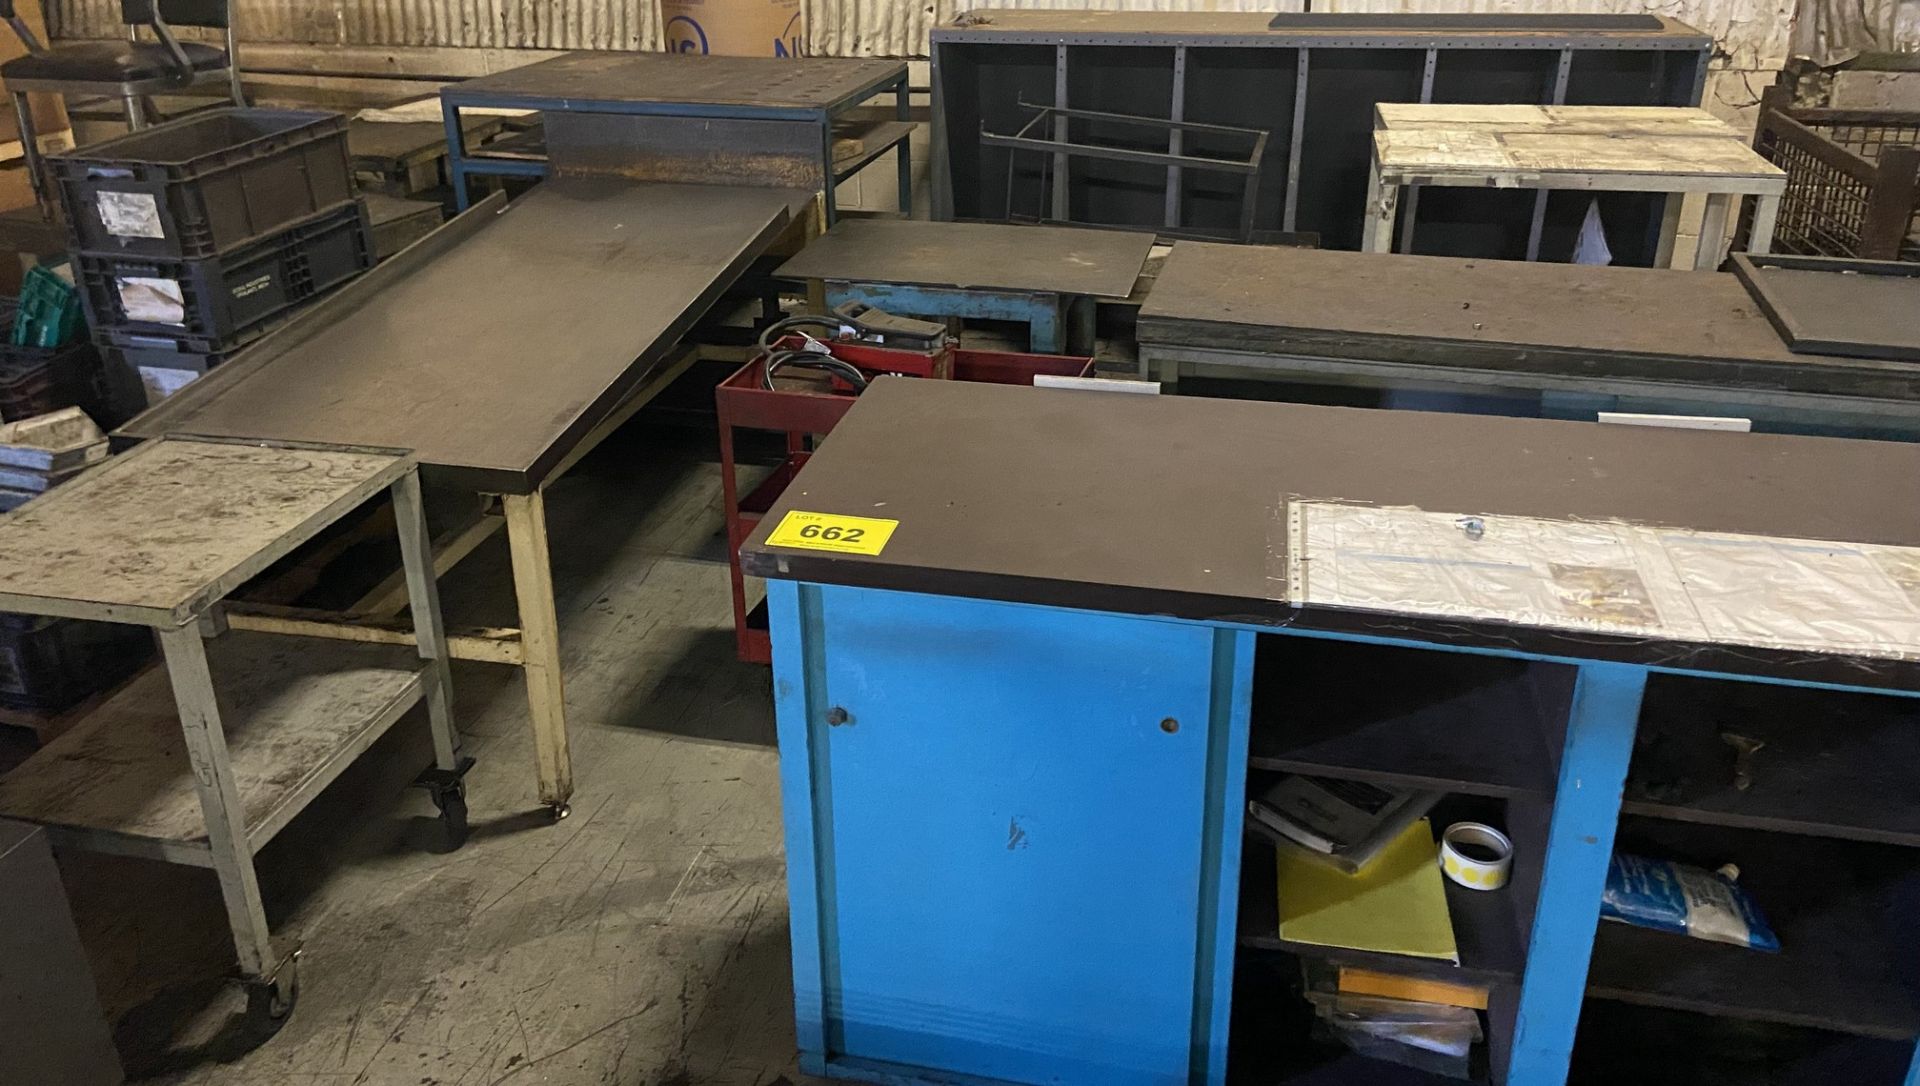 ASSORTED TABLES, BENCHES, CARTS SHELVING